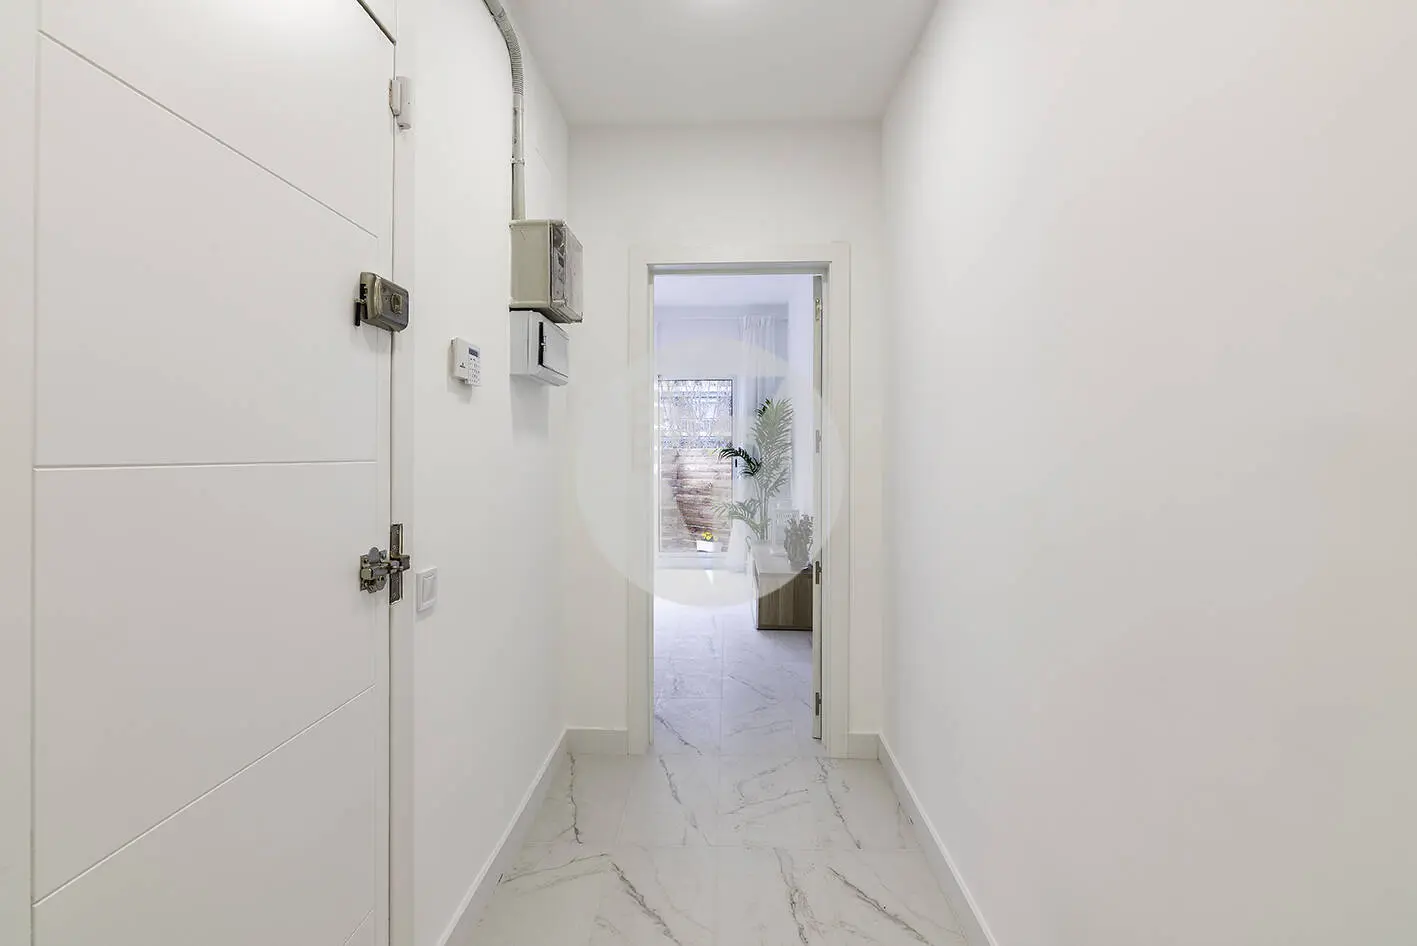 Brand new completely renovated apartment on Aragó street in the heart of El Clot in Barcelona. 40